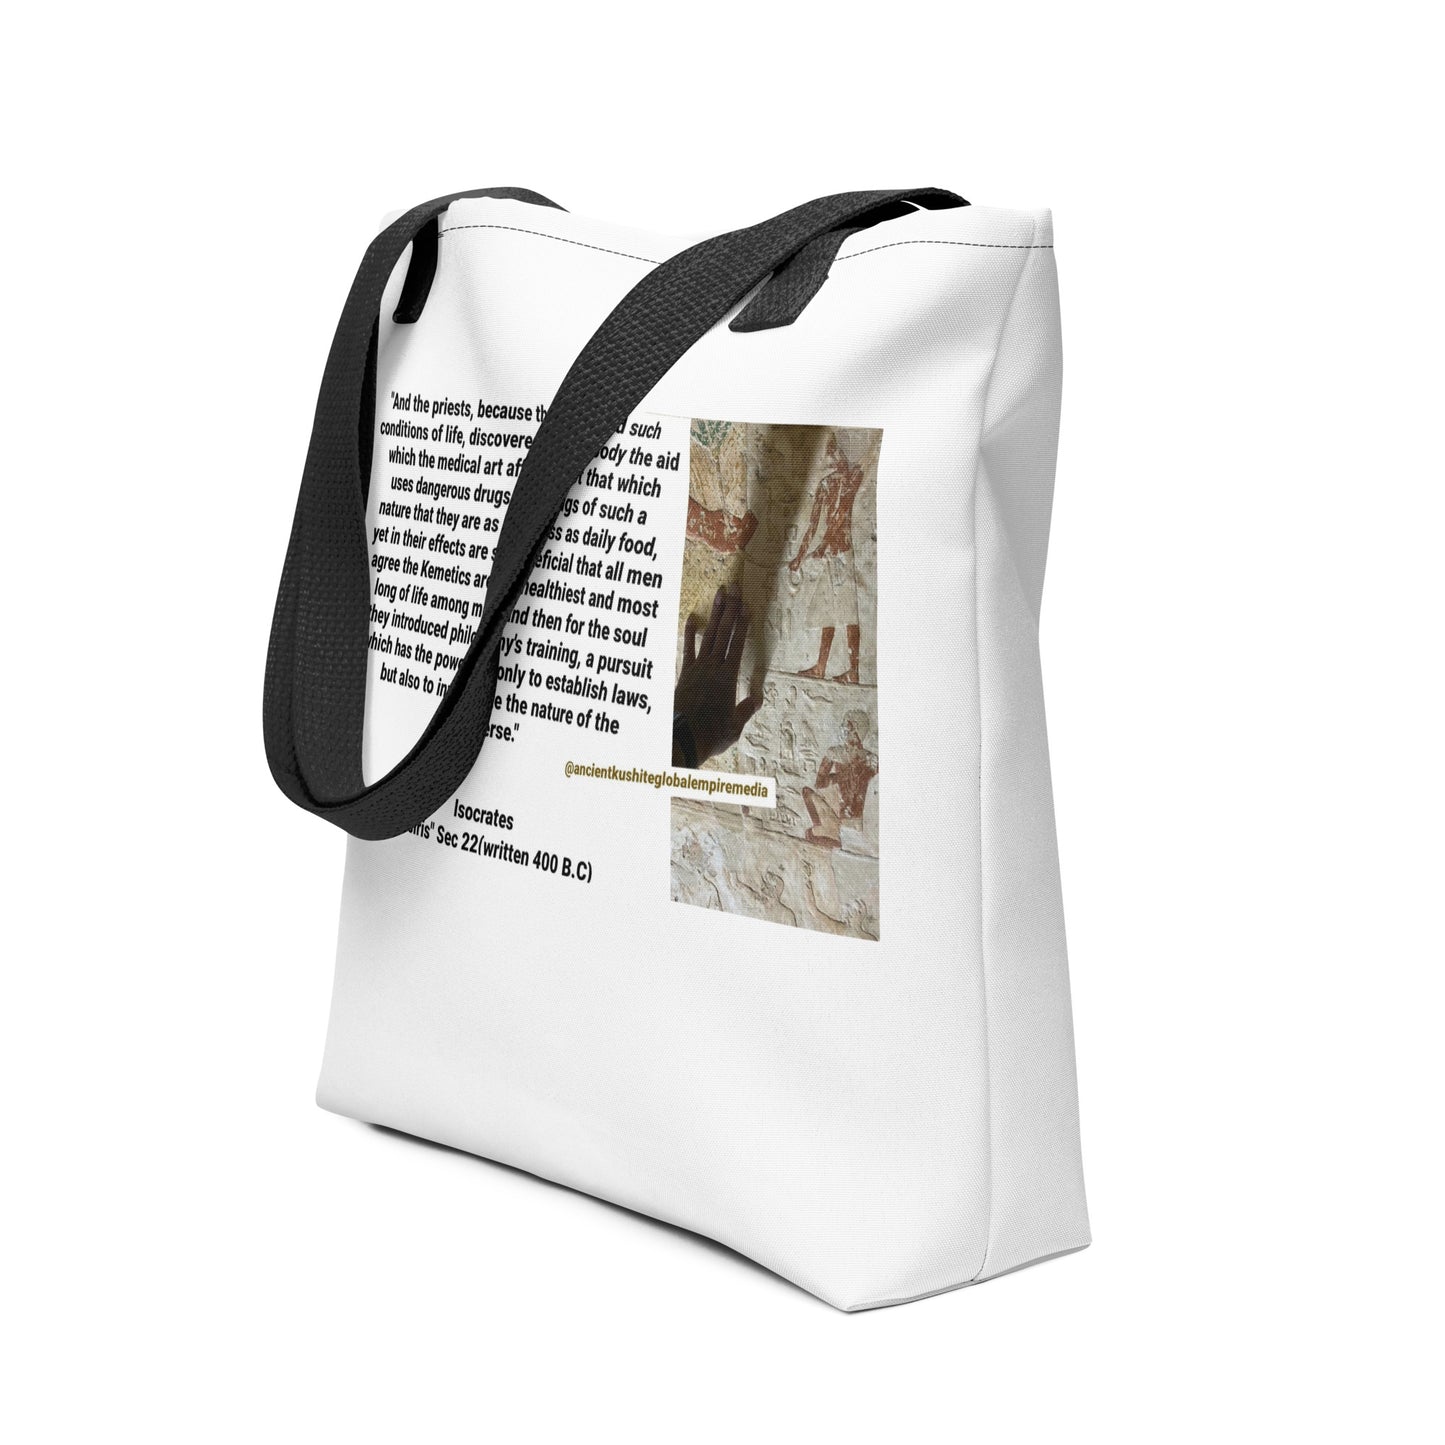 Kemetics are the Healthiest & most Long Among Men Tote bag